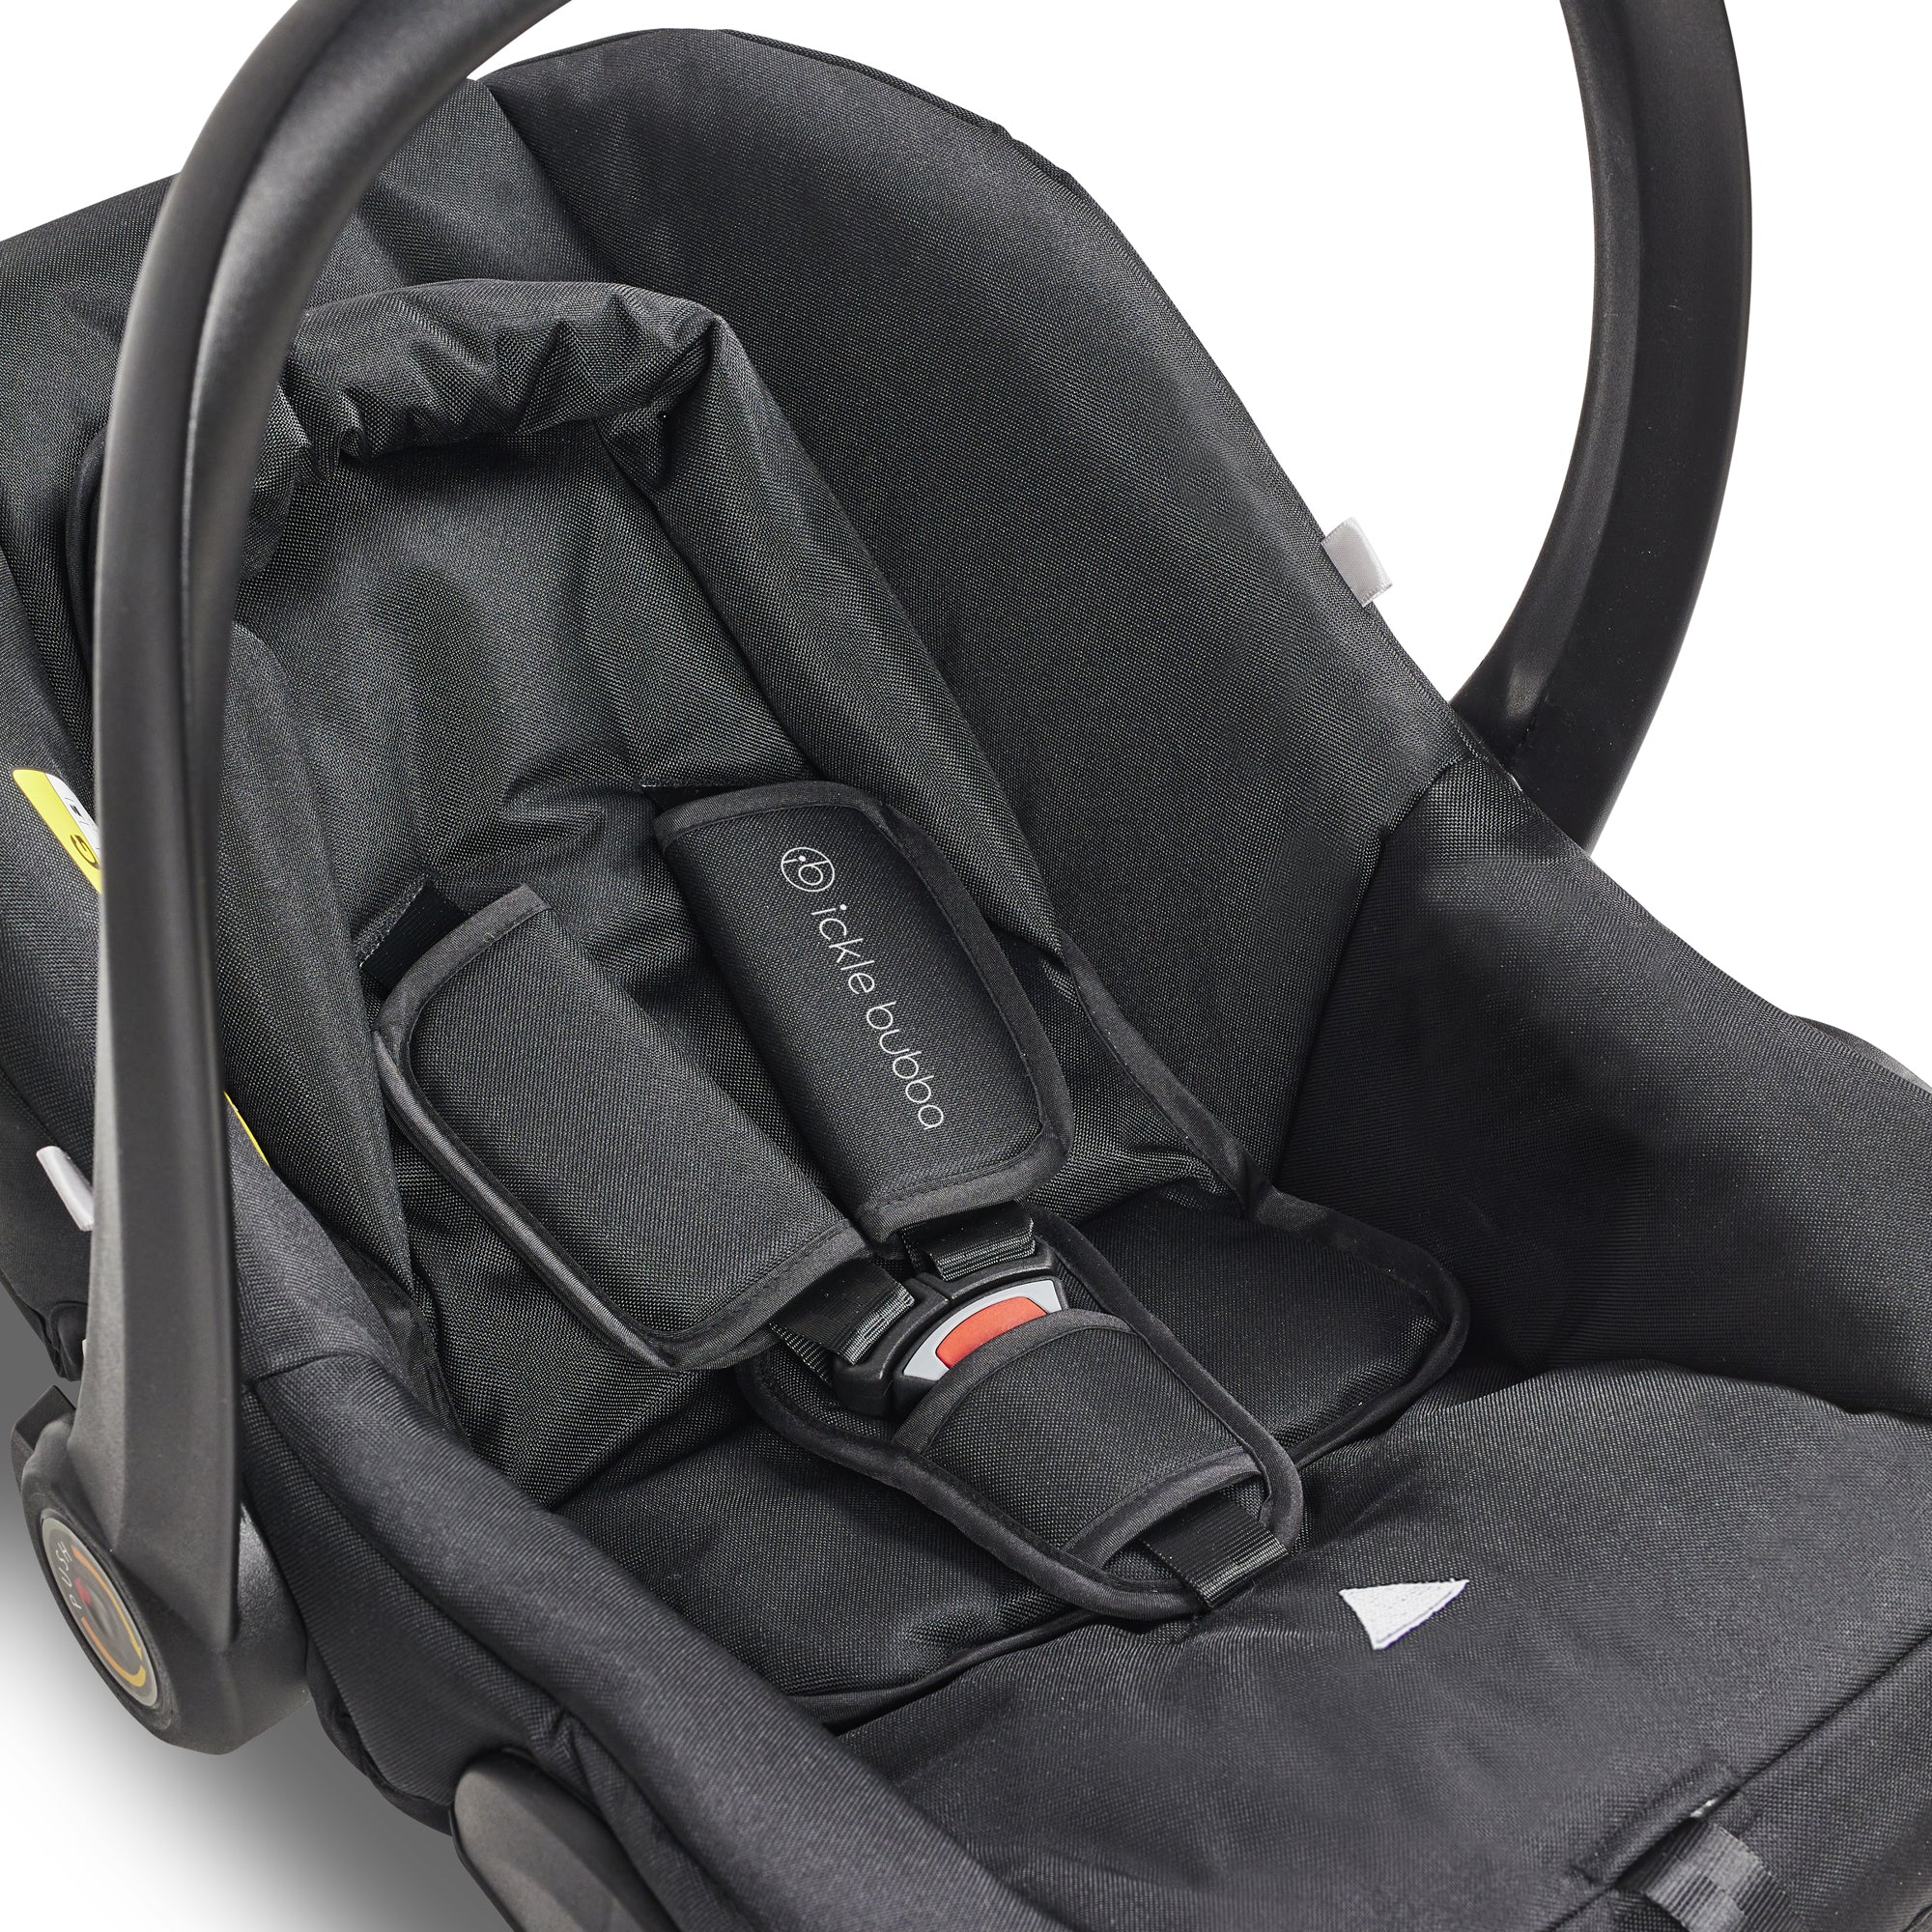 Astral Car Seat